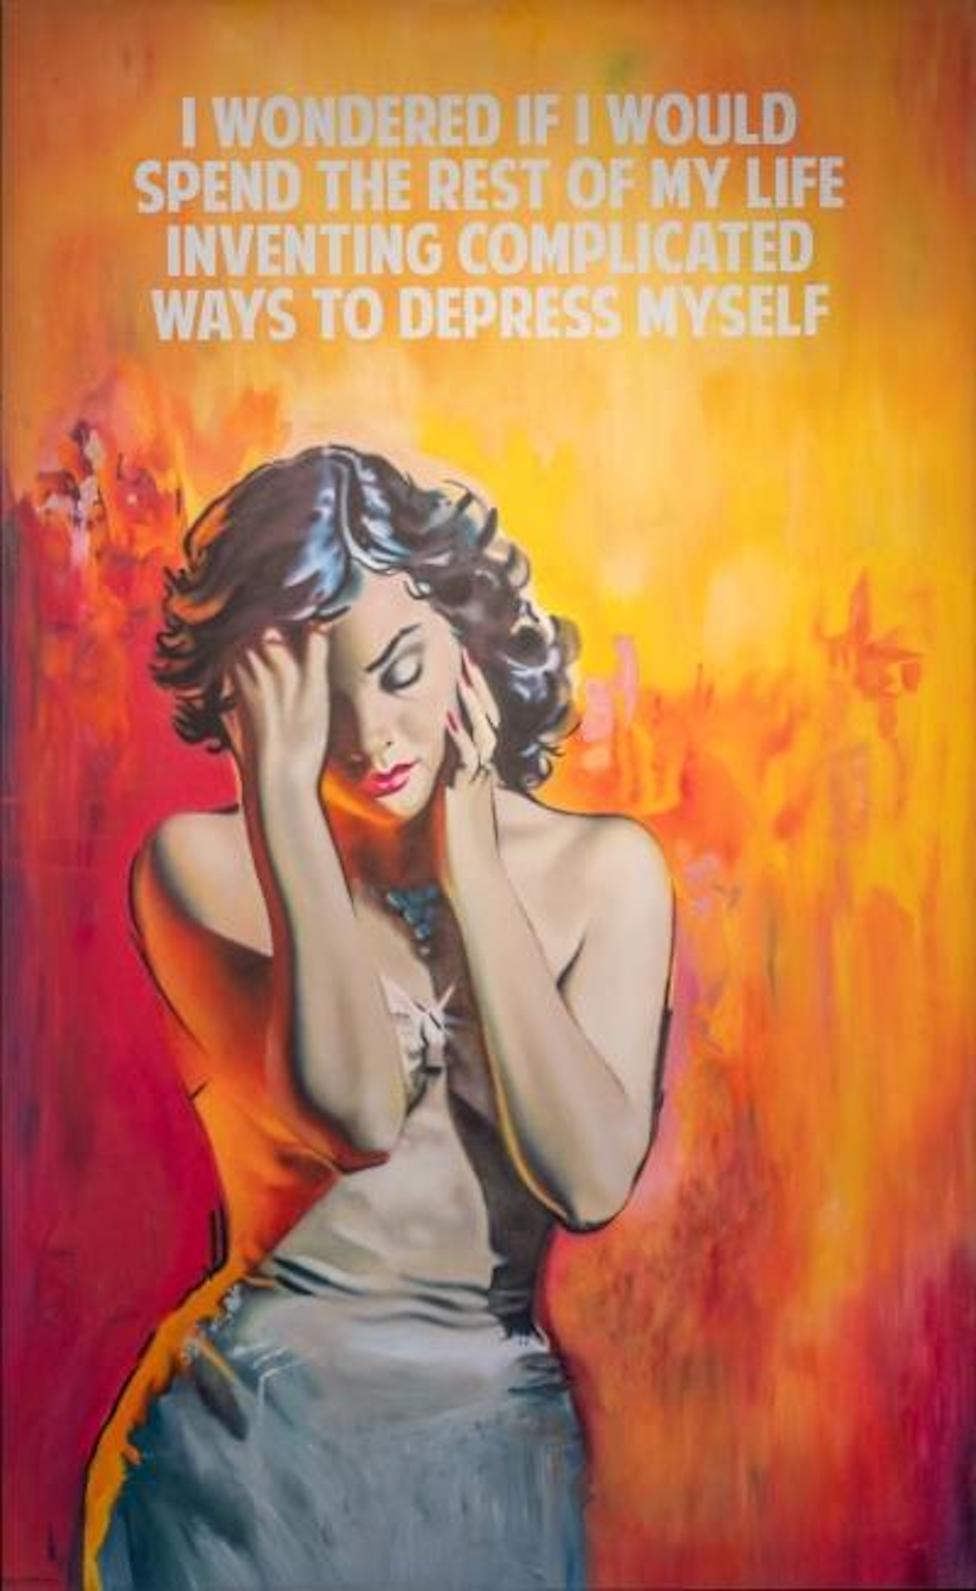 Depress Myself - Painting by The Connor Brothers 